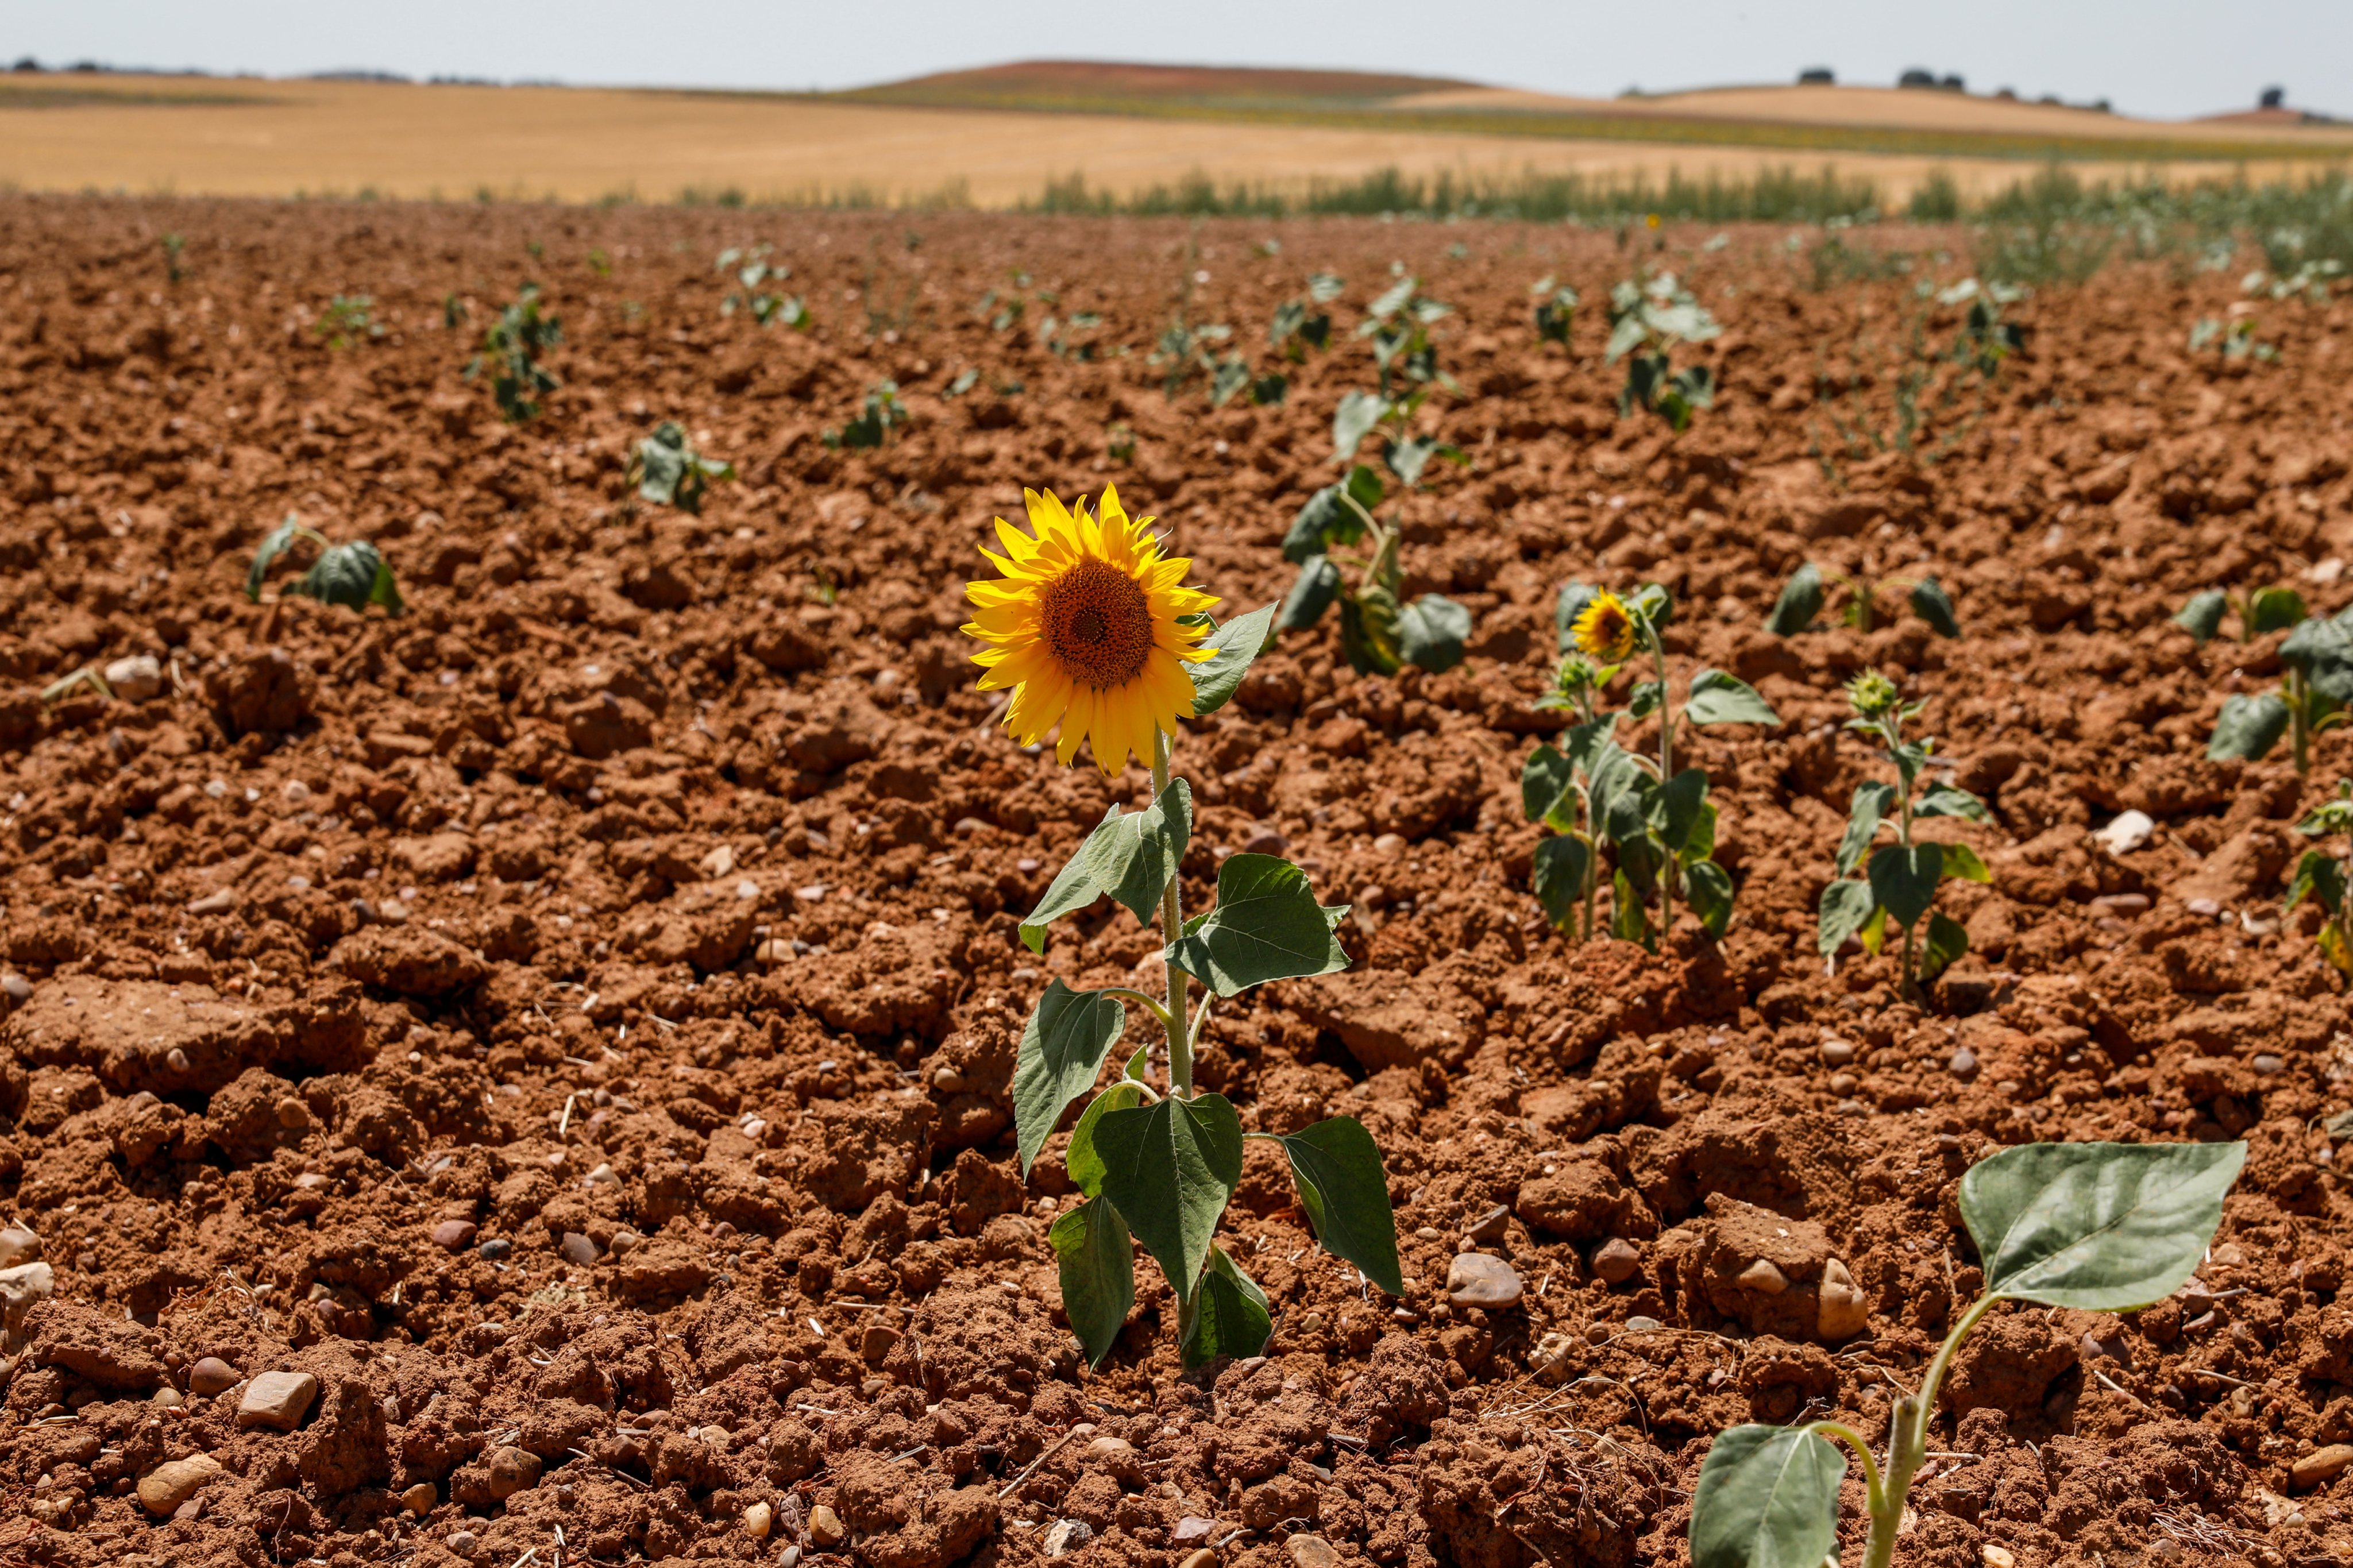 Spain Battles Extreme Drought During Prolonged Dry Spell